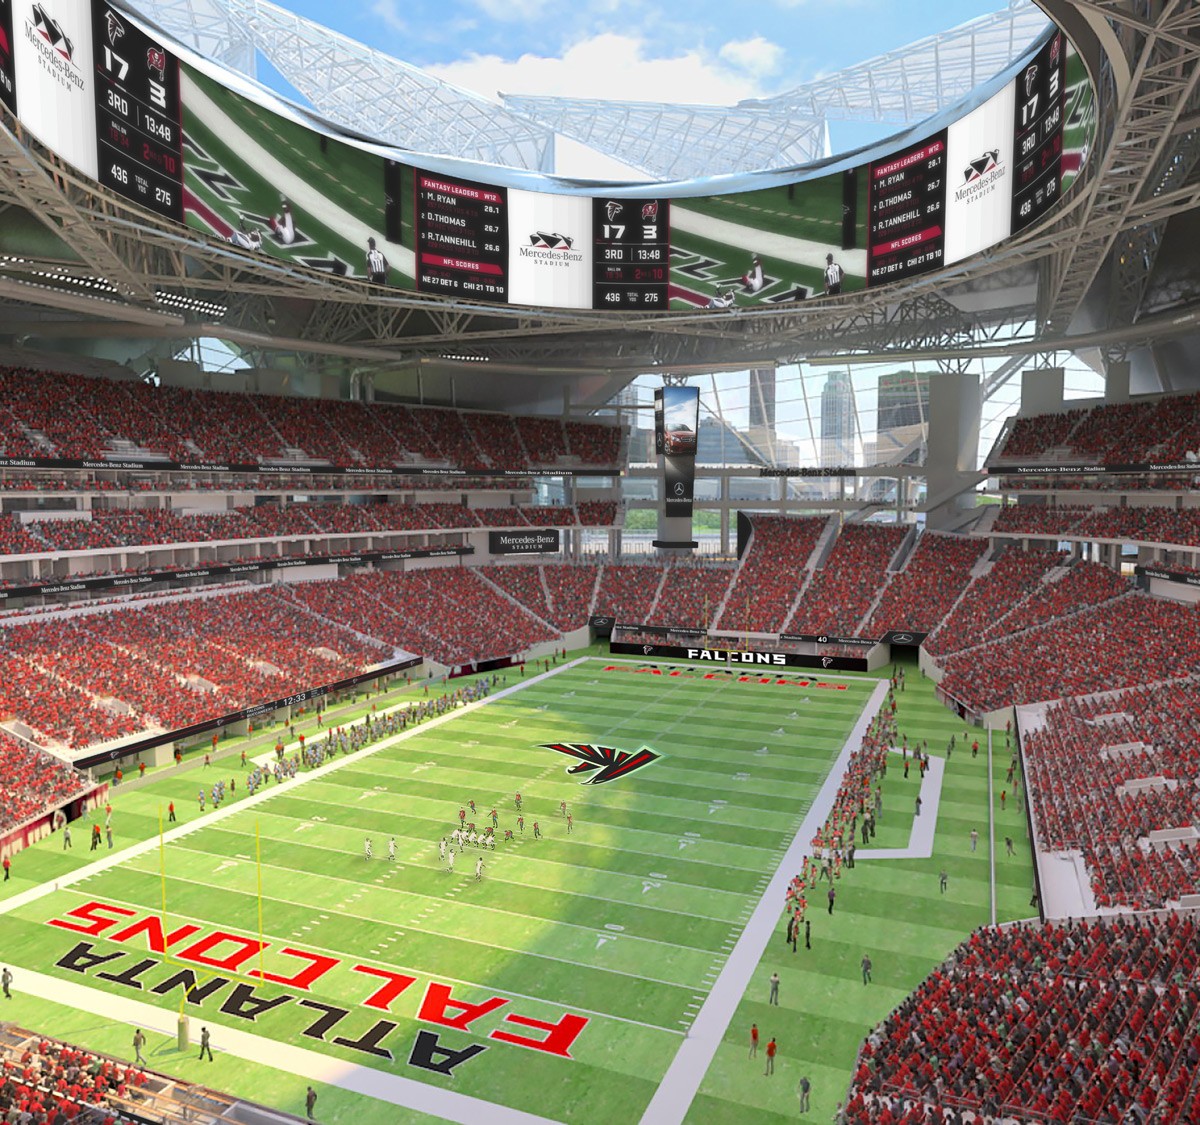 Beyond PSLs, ticket prices rise in new Falcons stadium